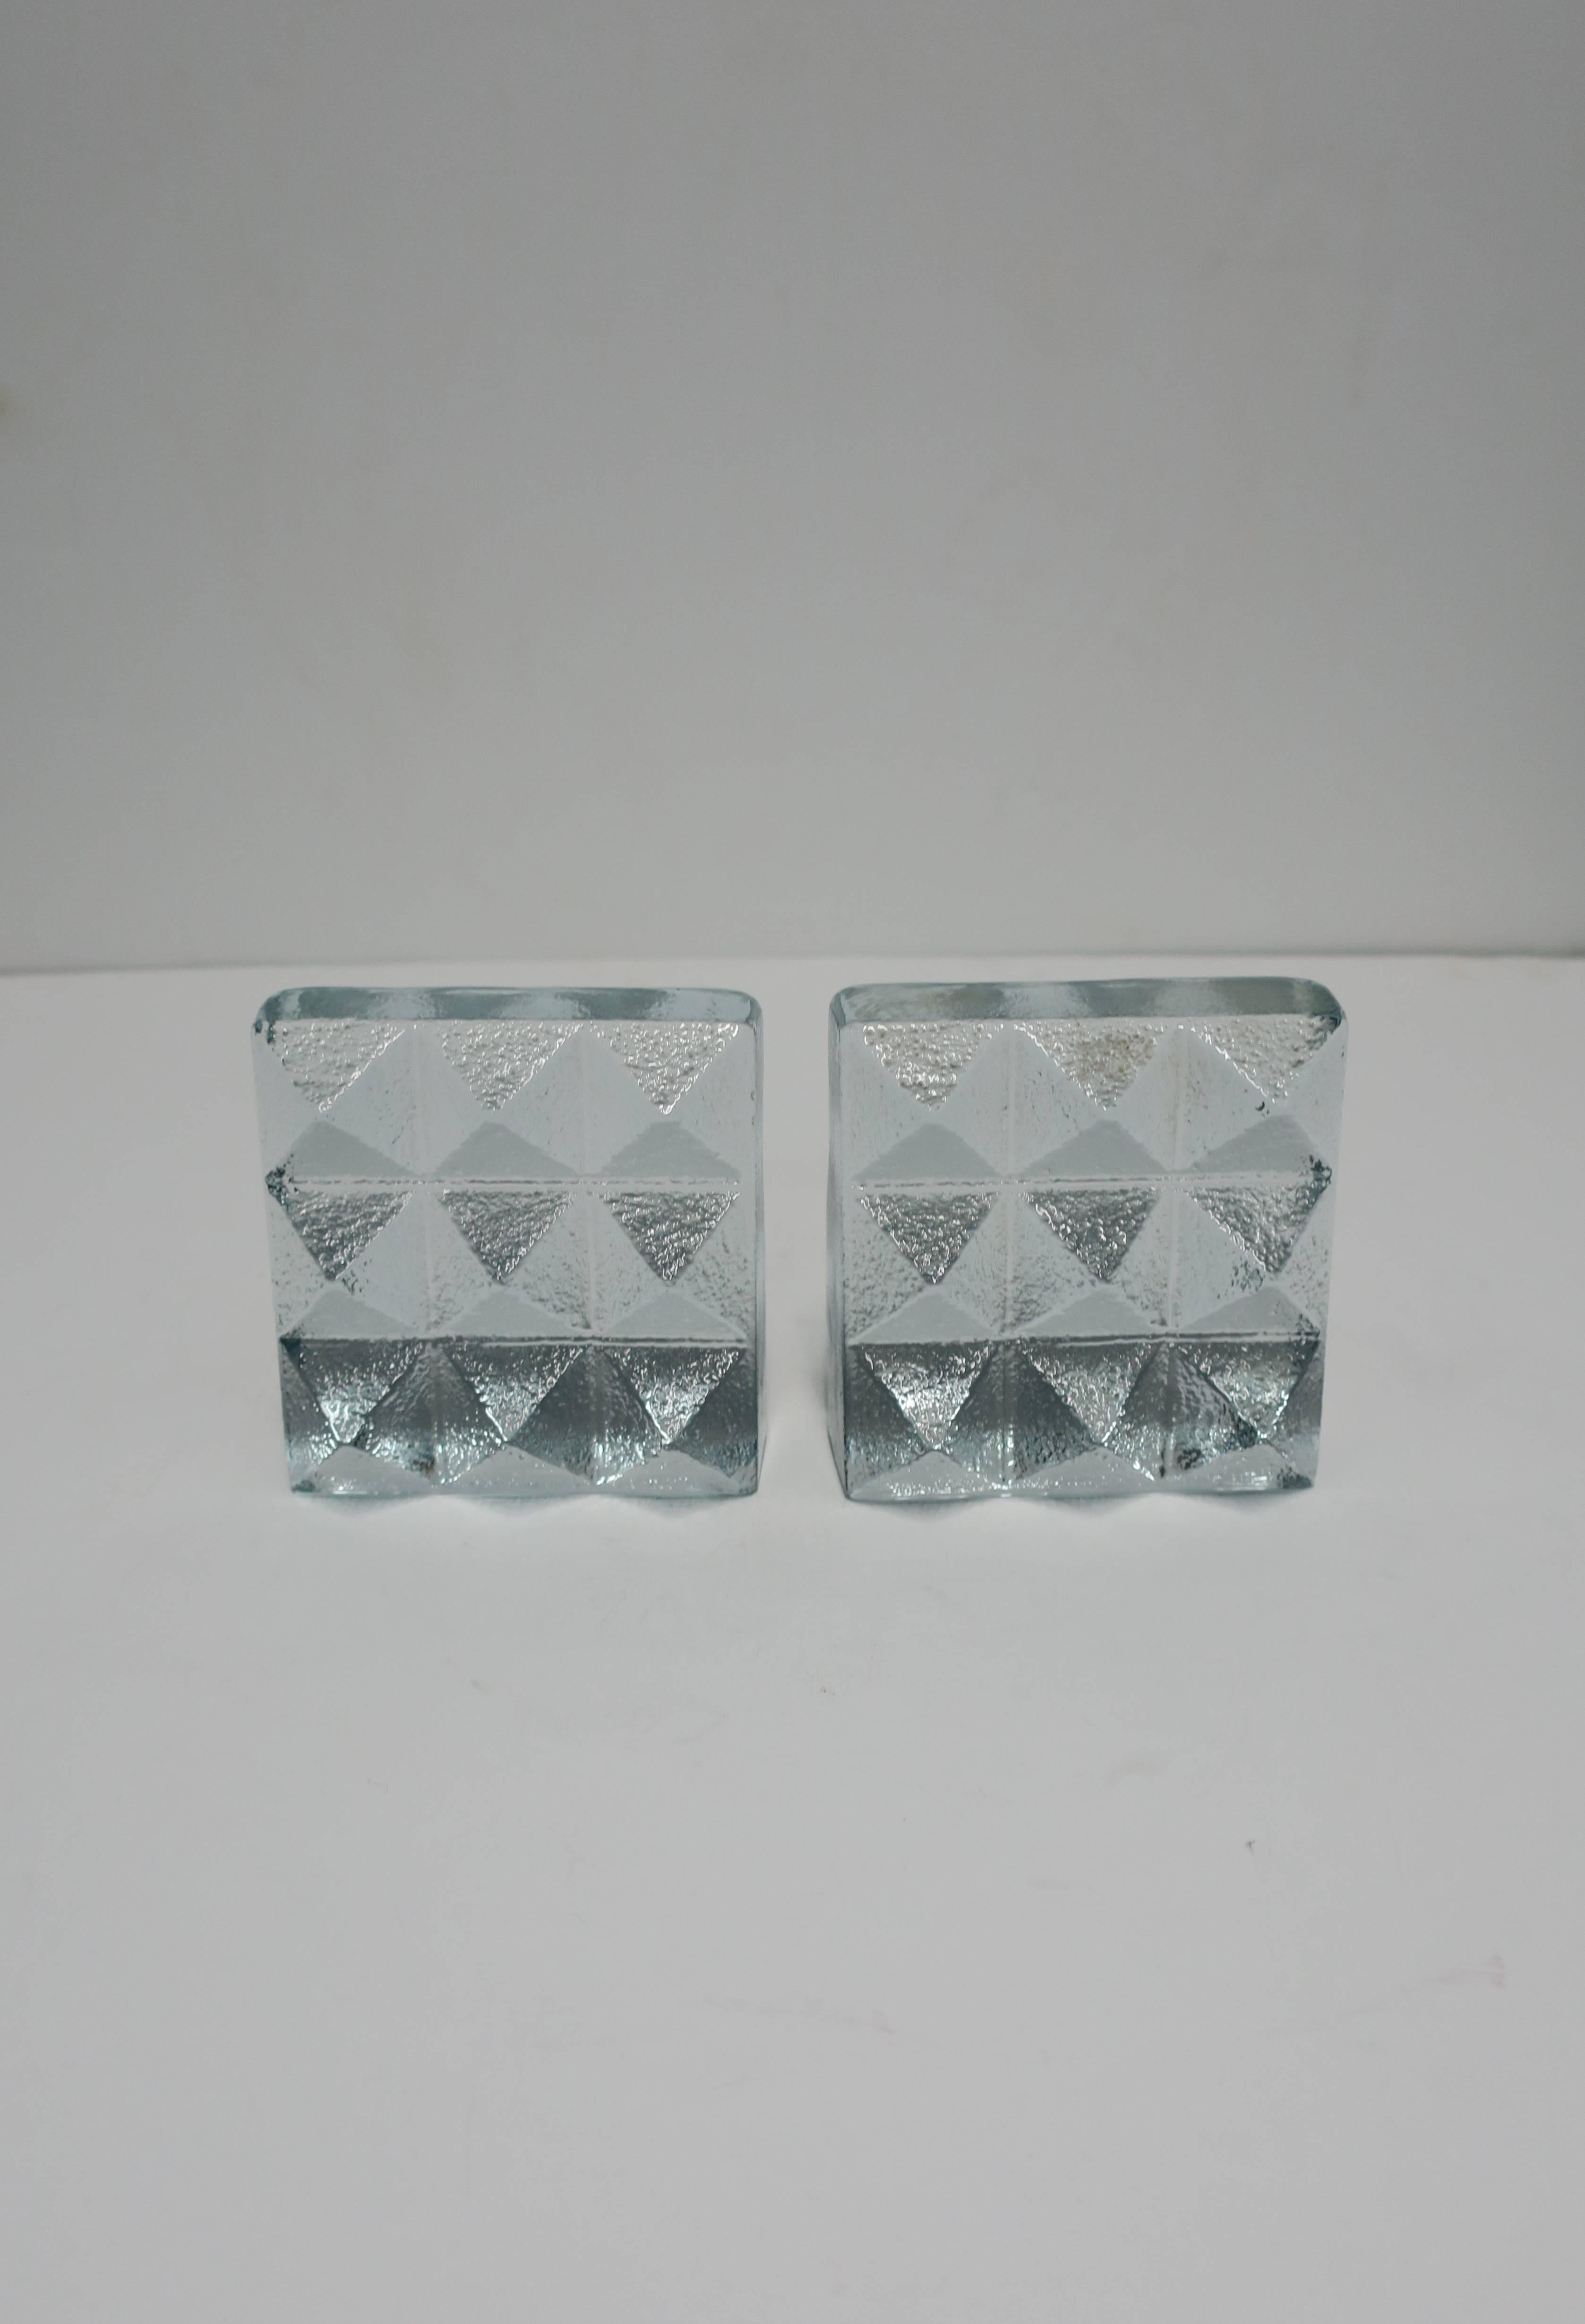 A pair of solid glass textured 'pyramid' stud bookends from Blenko Glass, circa late-20th to early 21st century, USA. Glass is clear with a hint of an ice blue hue. 

